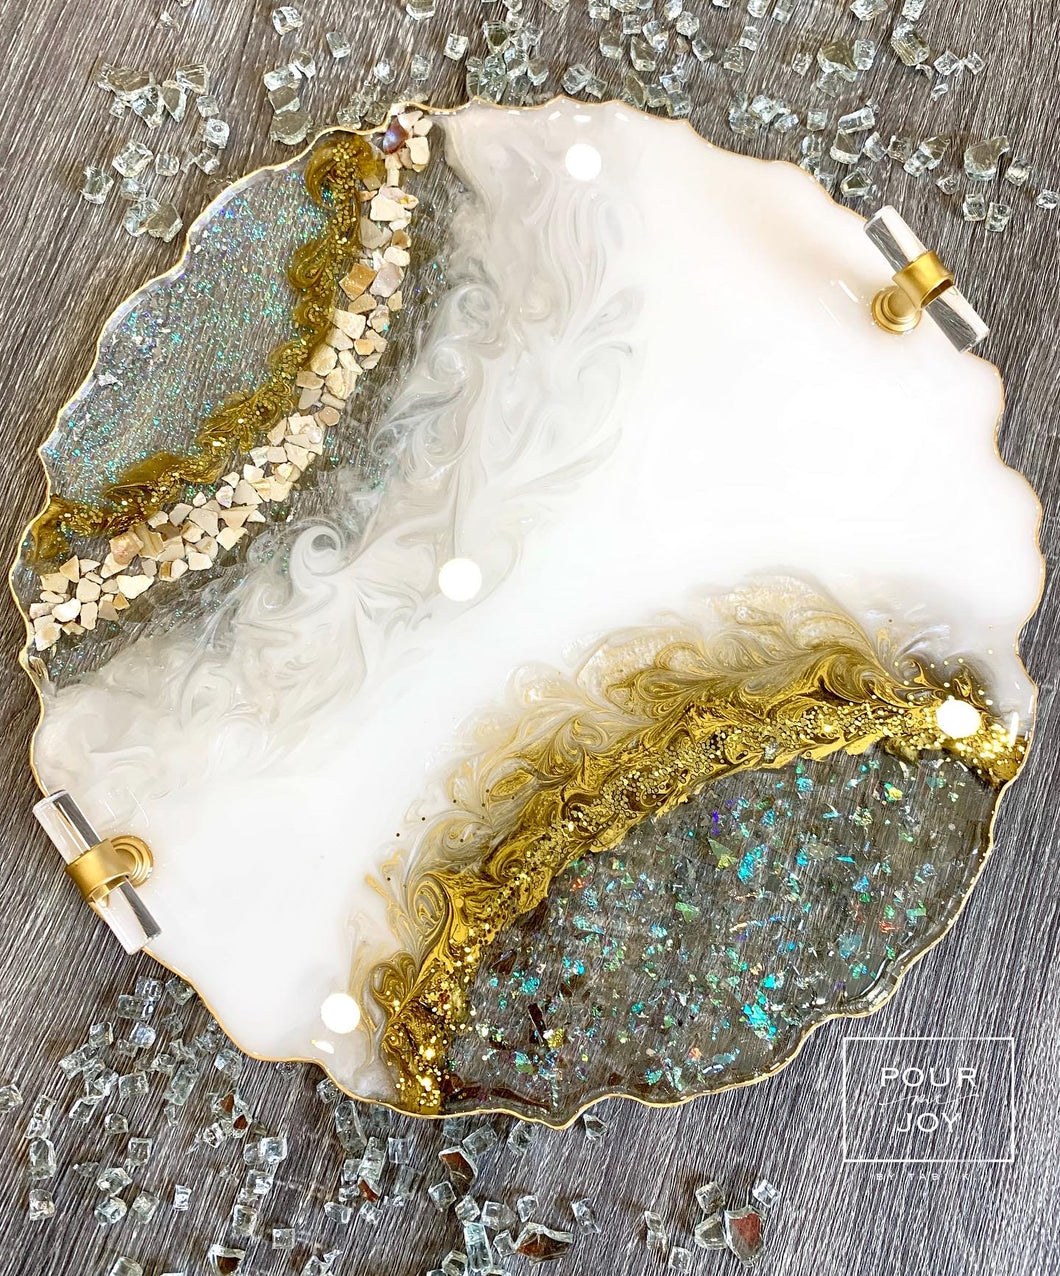 White, Gold and Opal Geode Tray - Resin, Sea Shells & Crystals